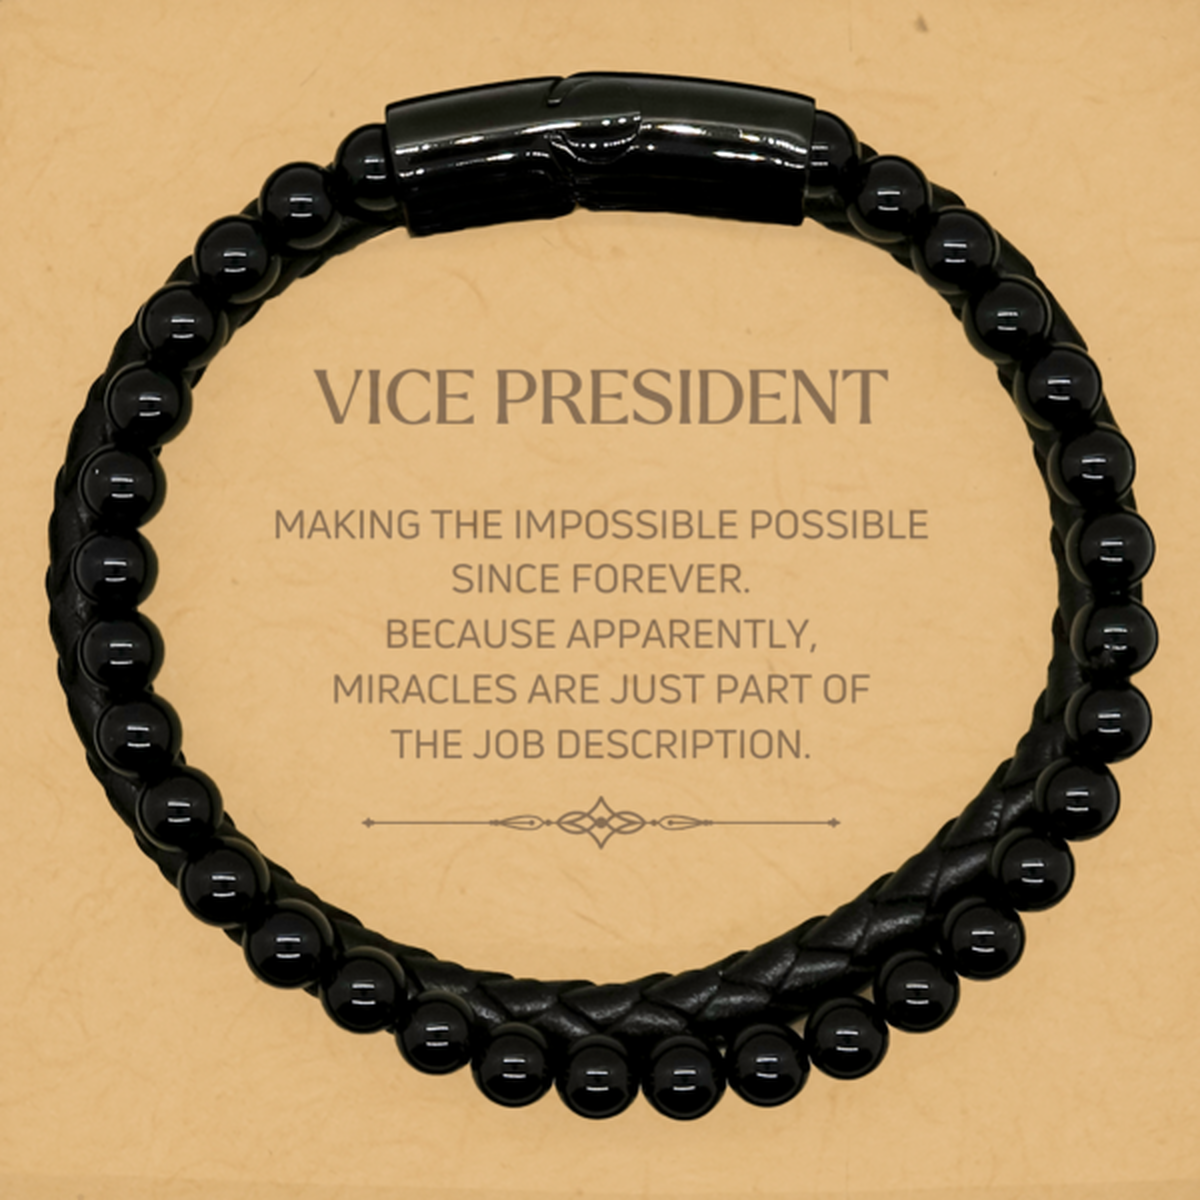 Funny Vice President Gifts, Miracles are just part of the job description, Inspirational Birthday Stone Leather Bracelets For Vice President, Men, Women, Coworkers, Friends, Boss